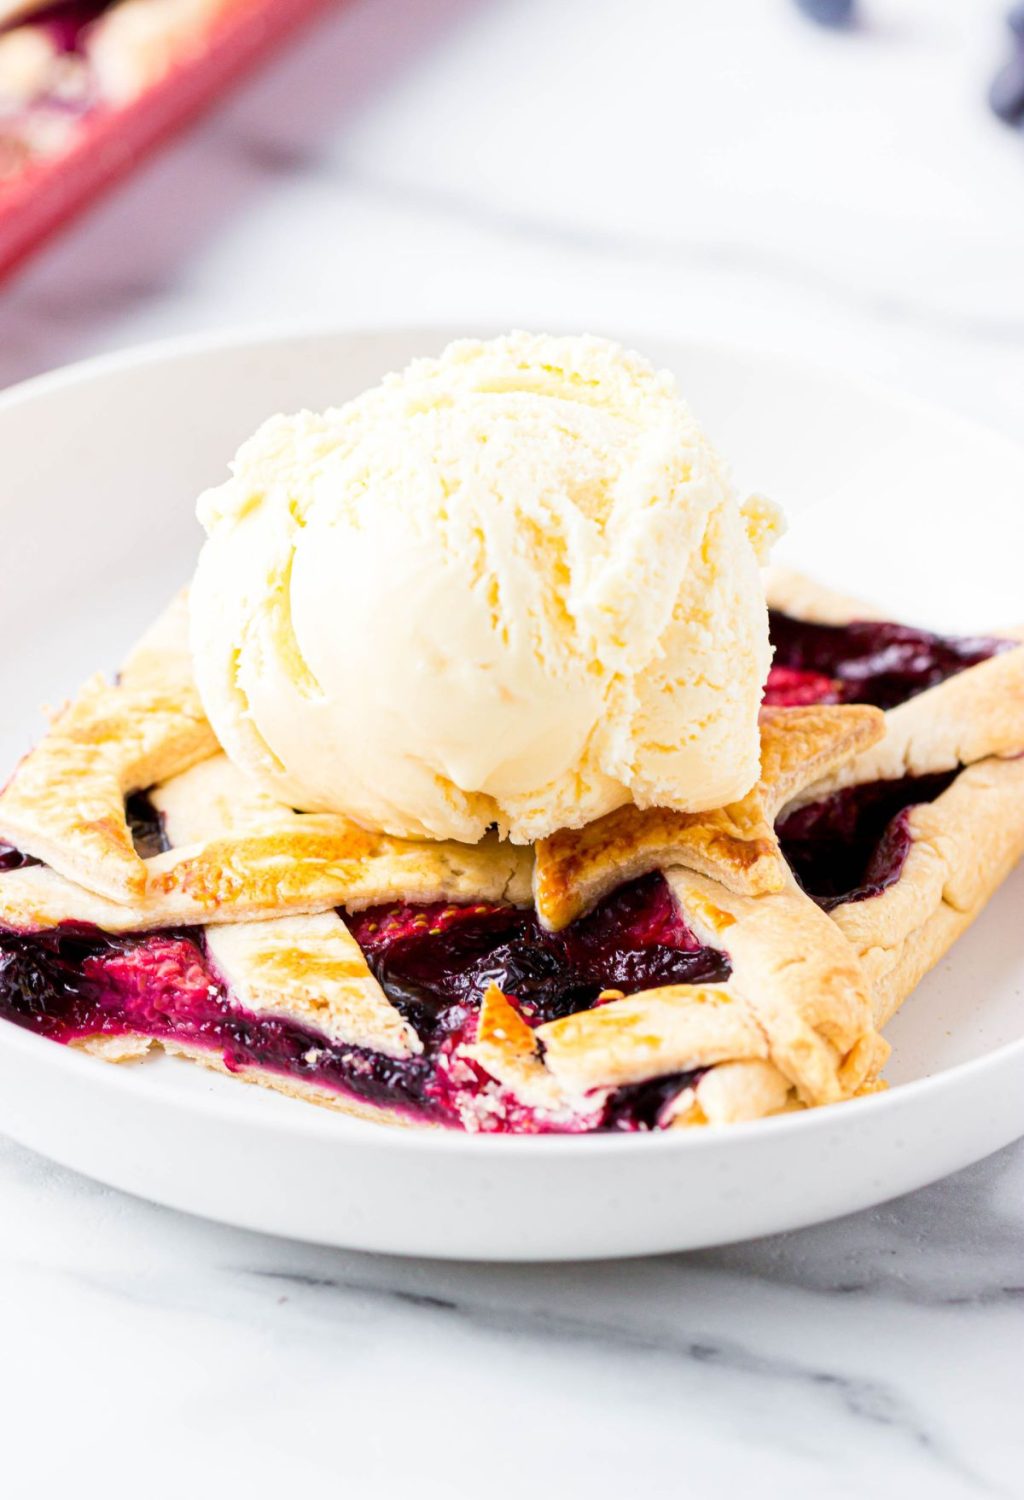 A blueberry pie with ice cream on a plate.